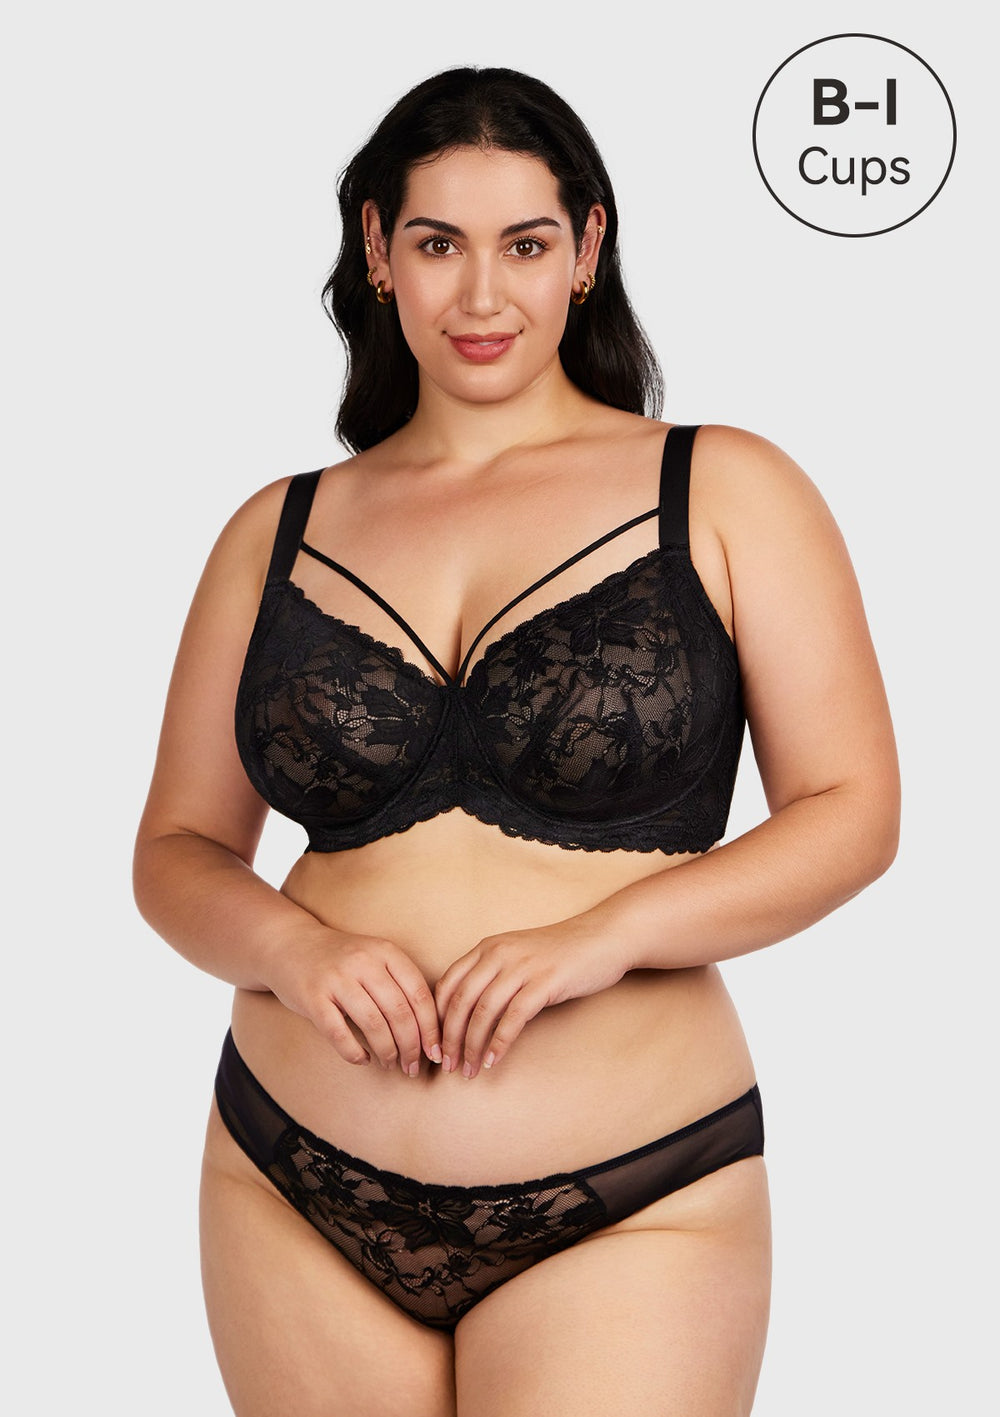 Buy HSIA Minimizer Bra for Women,Unlined Non Padded Lace Sexy Plus Size  Bras Full Figure Black Bras